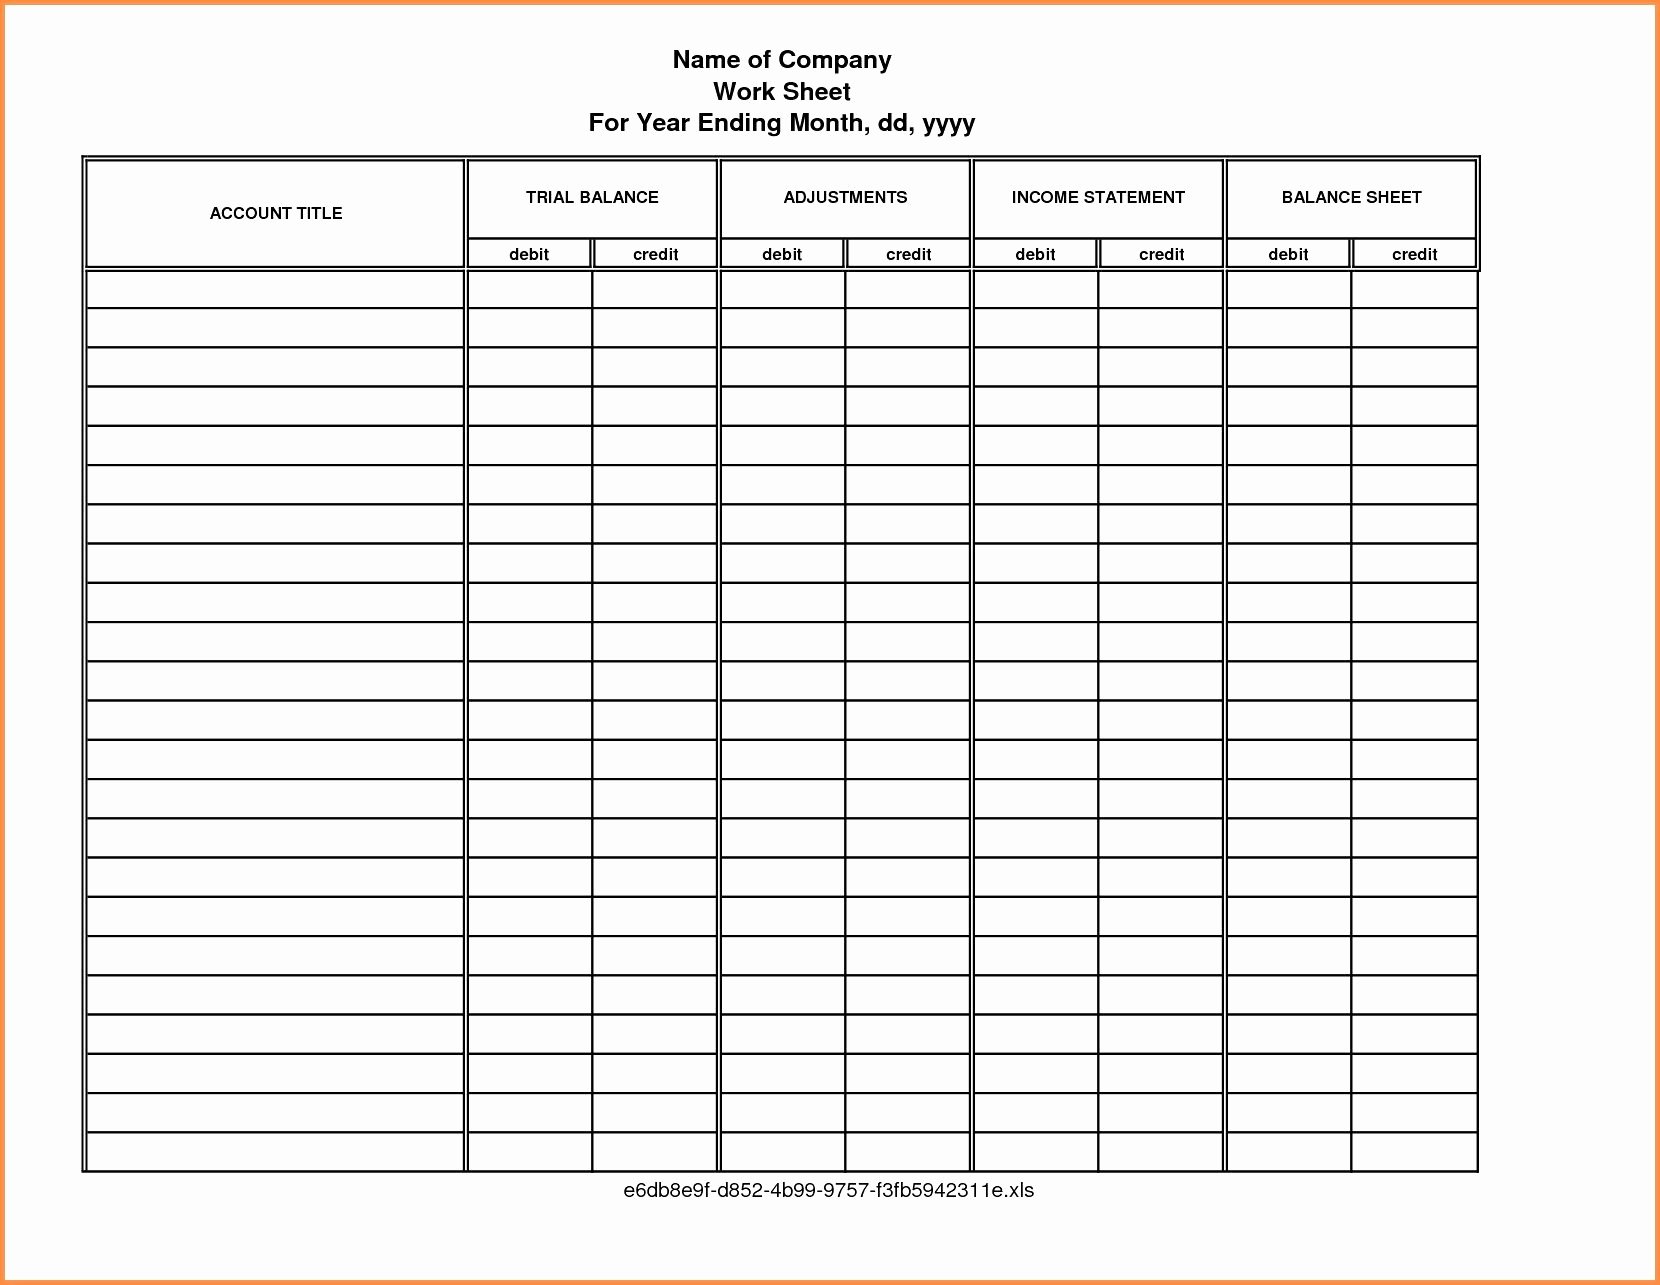 Rent Collection Spreadsheet Template Lovely Balance Sheet Template for Rental Property Heritage